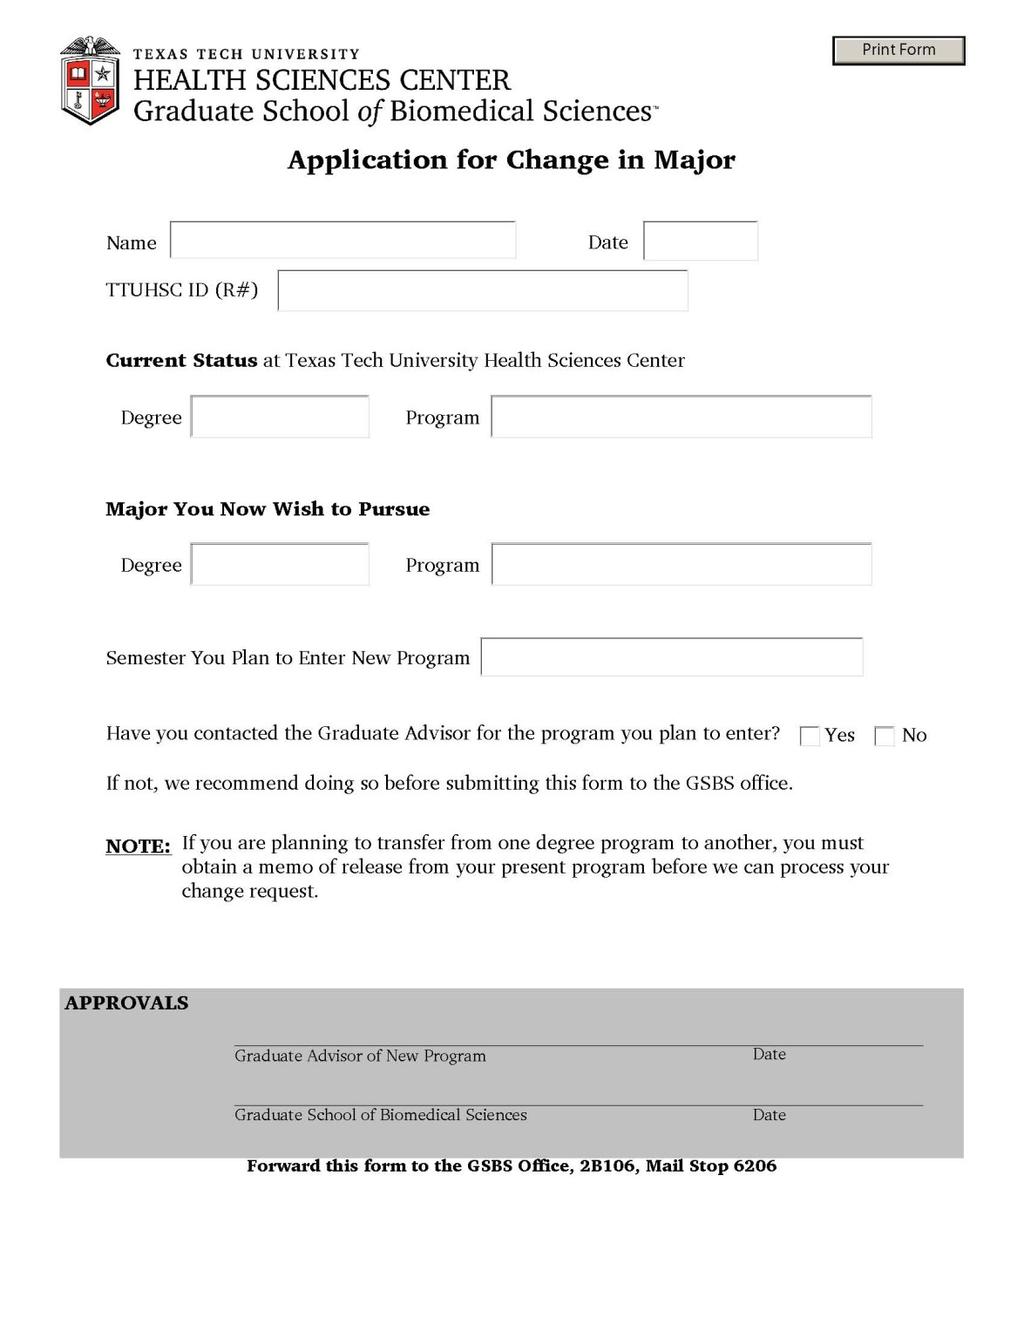 APPLICATION FOR CHANGE IN MAJOR (MUST BE COMPLETED ON-LINE AT: http://www.ttuhsc.